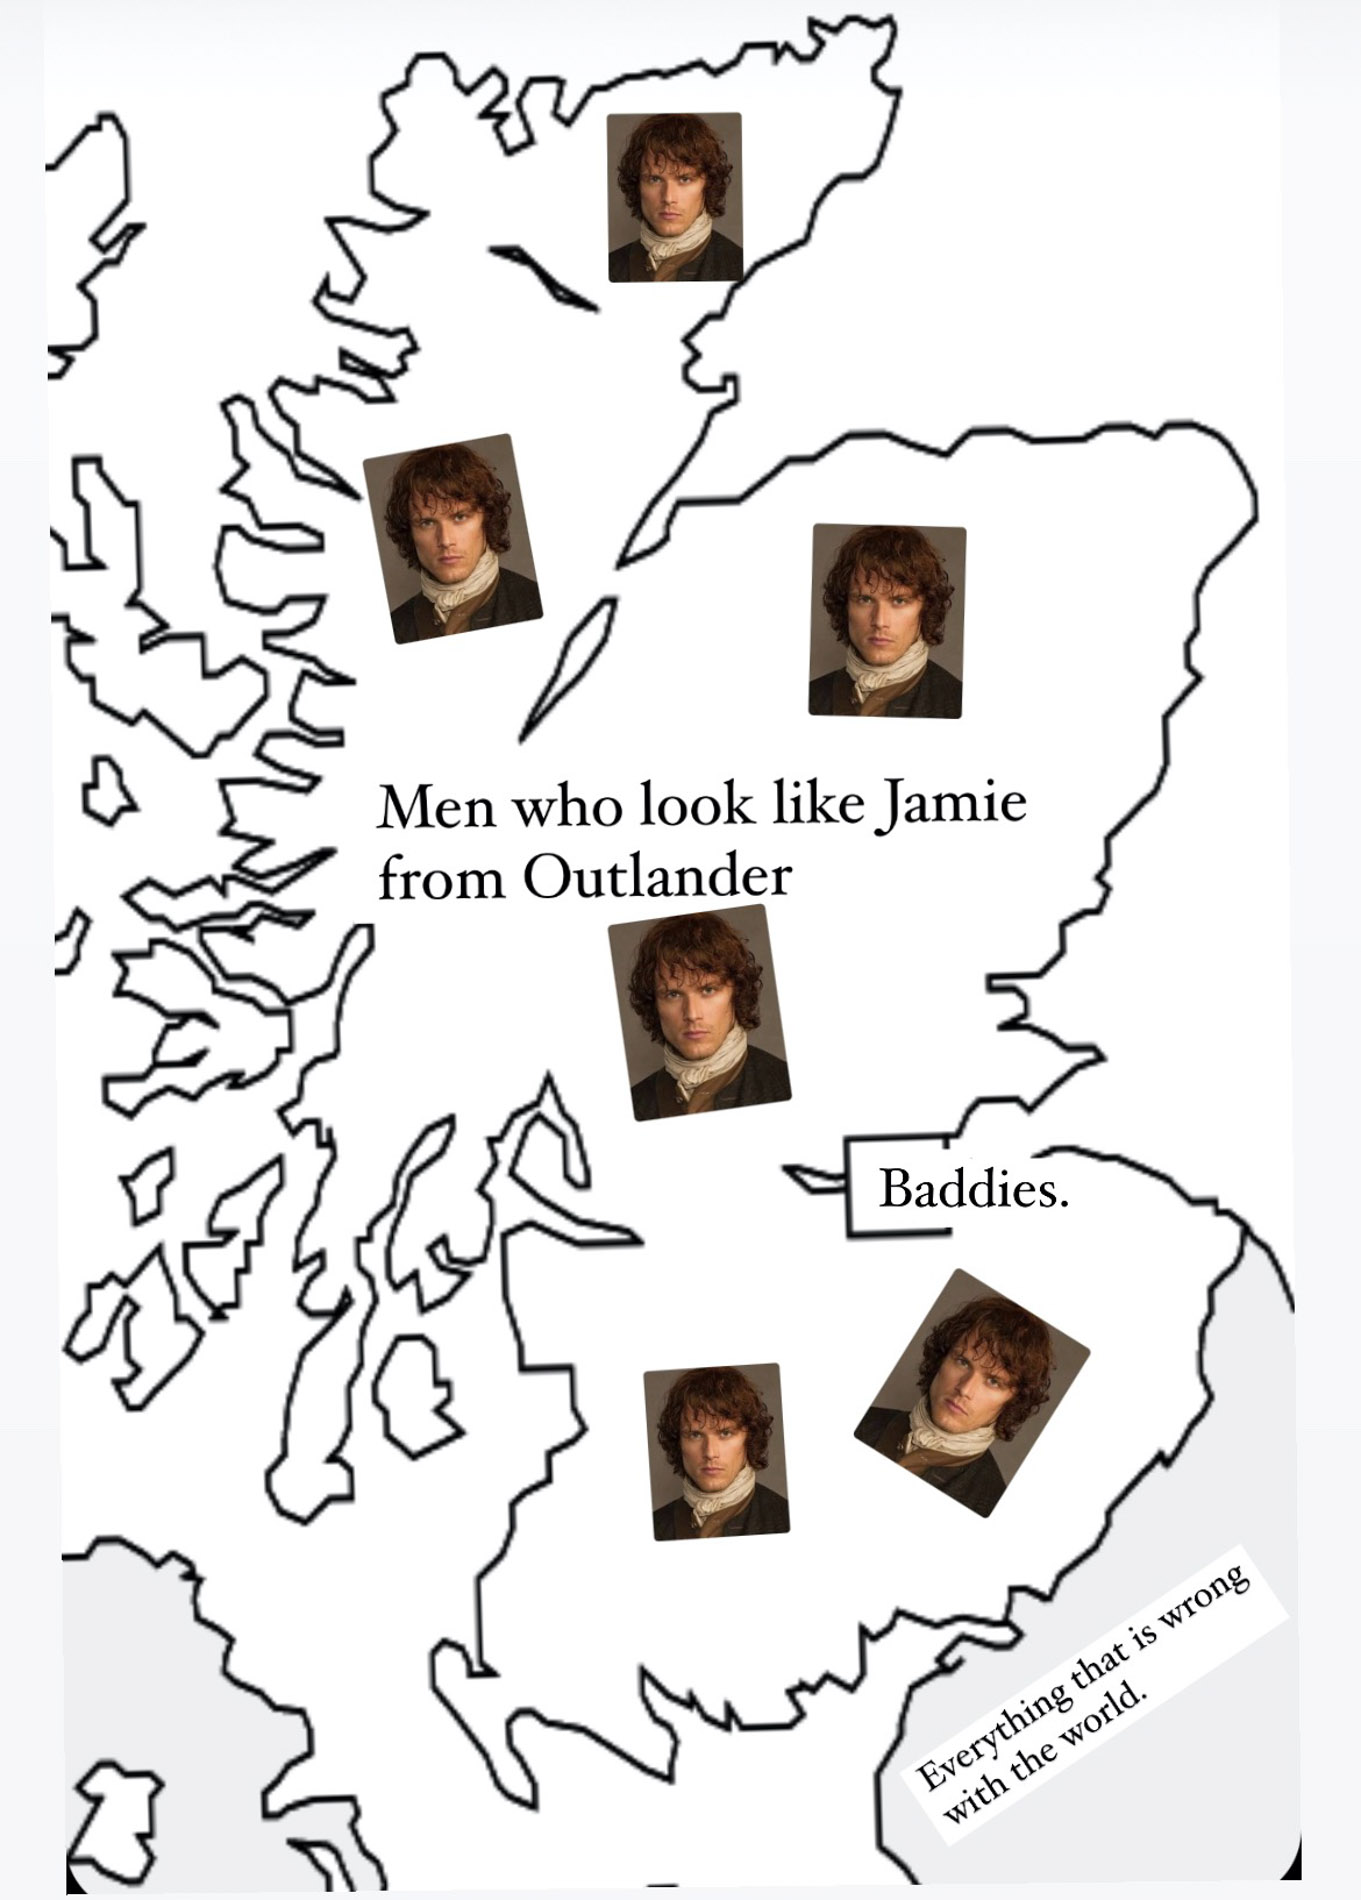 Things we learned about Scotland from reading romantic fiction